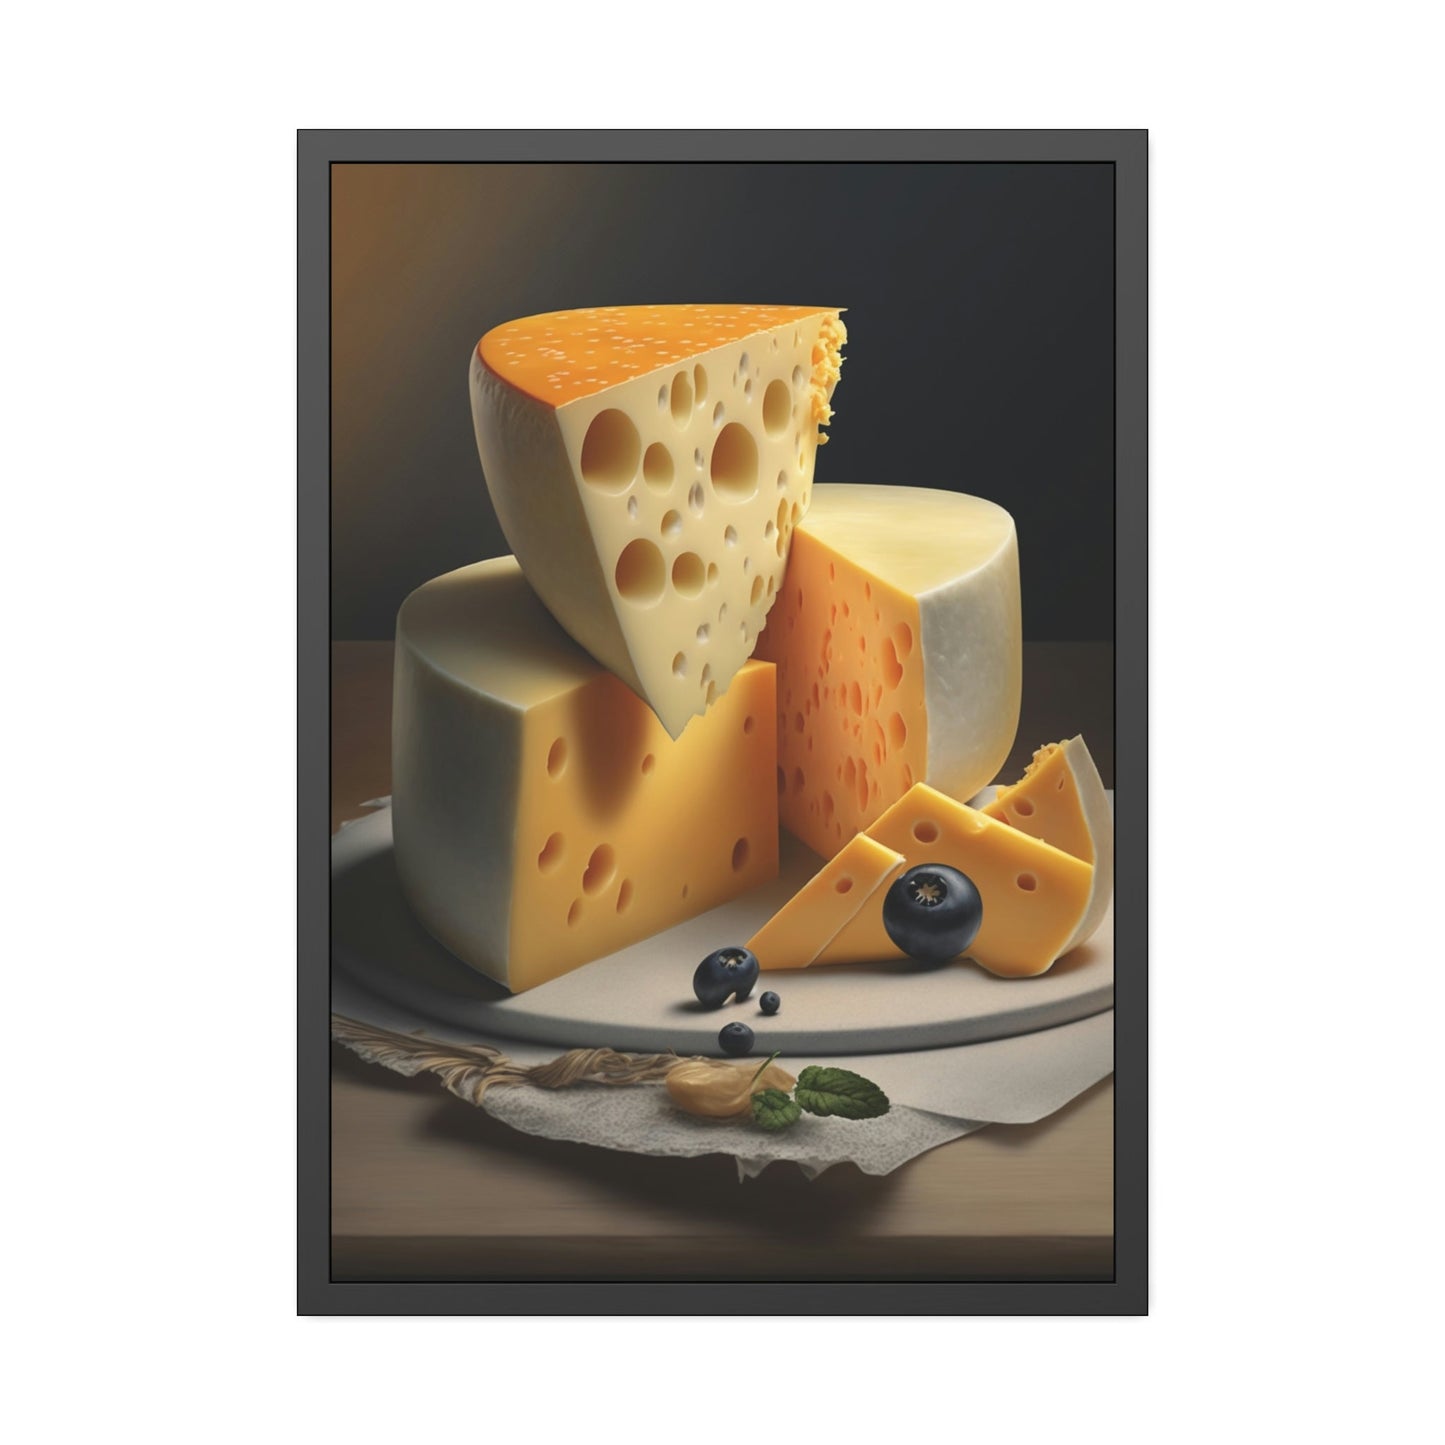 The Cheesy Charm: Framed Canvas and Poster Featuring Delicious Cheeses